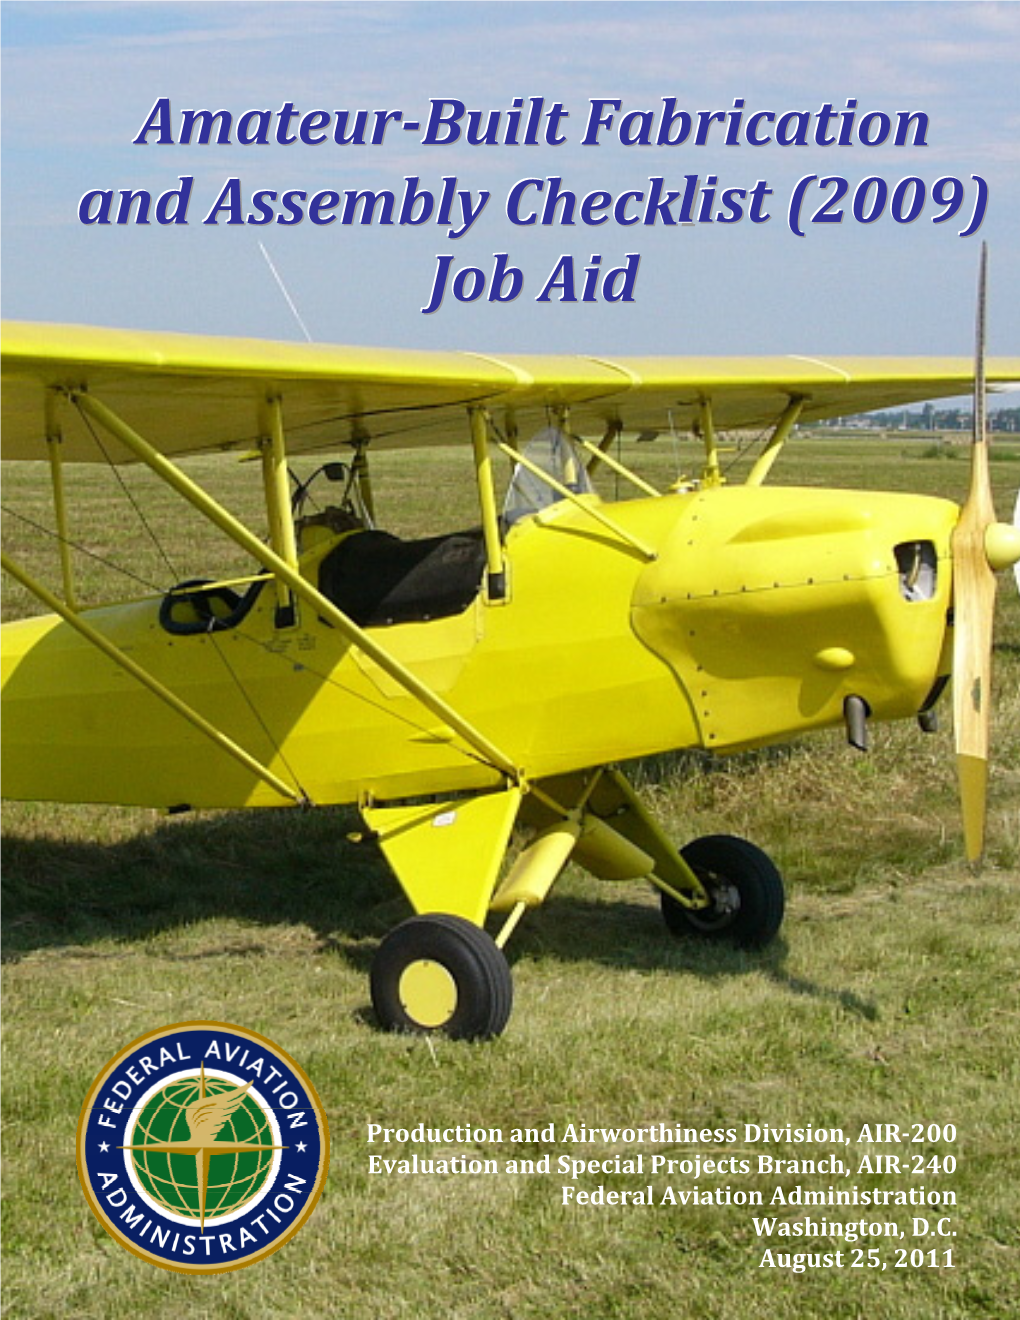 Amateur-Built Fabrication and Assembly Checklist (2009) Job Aid